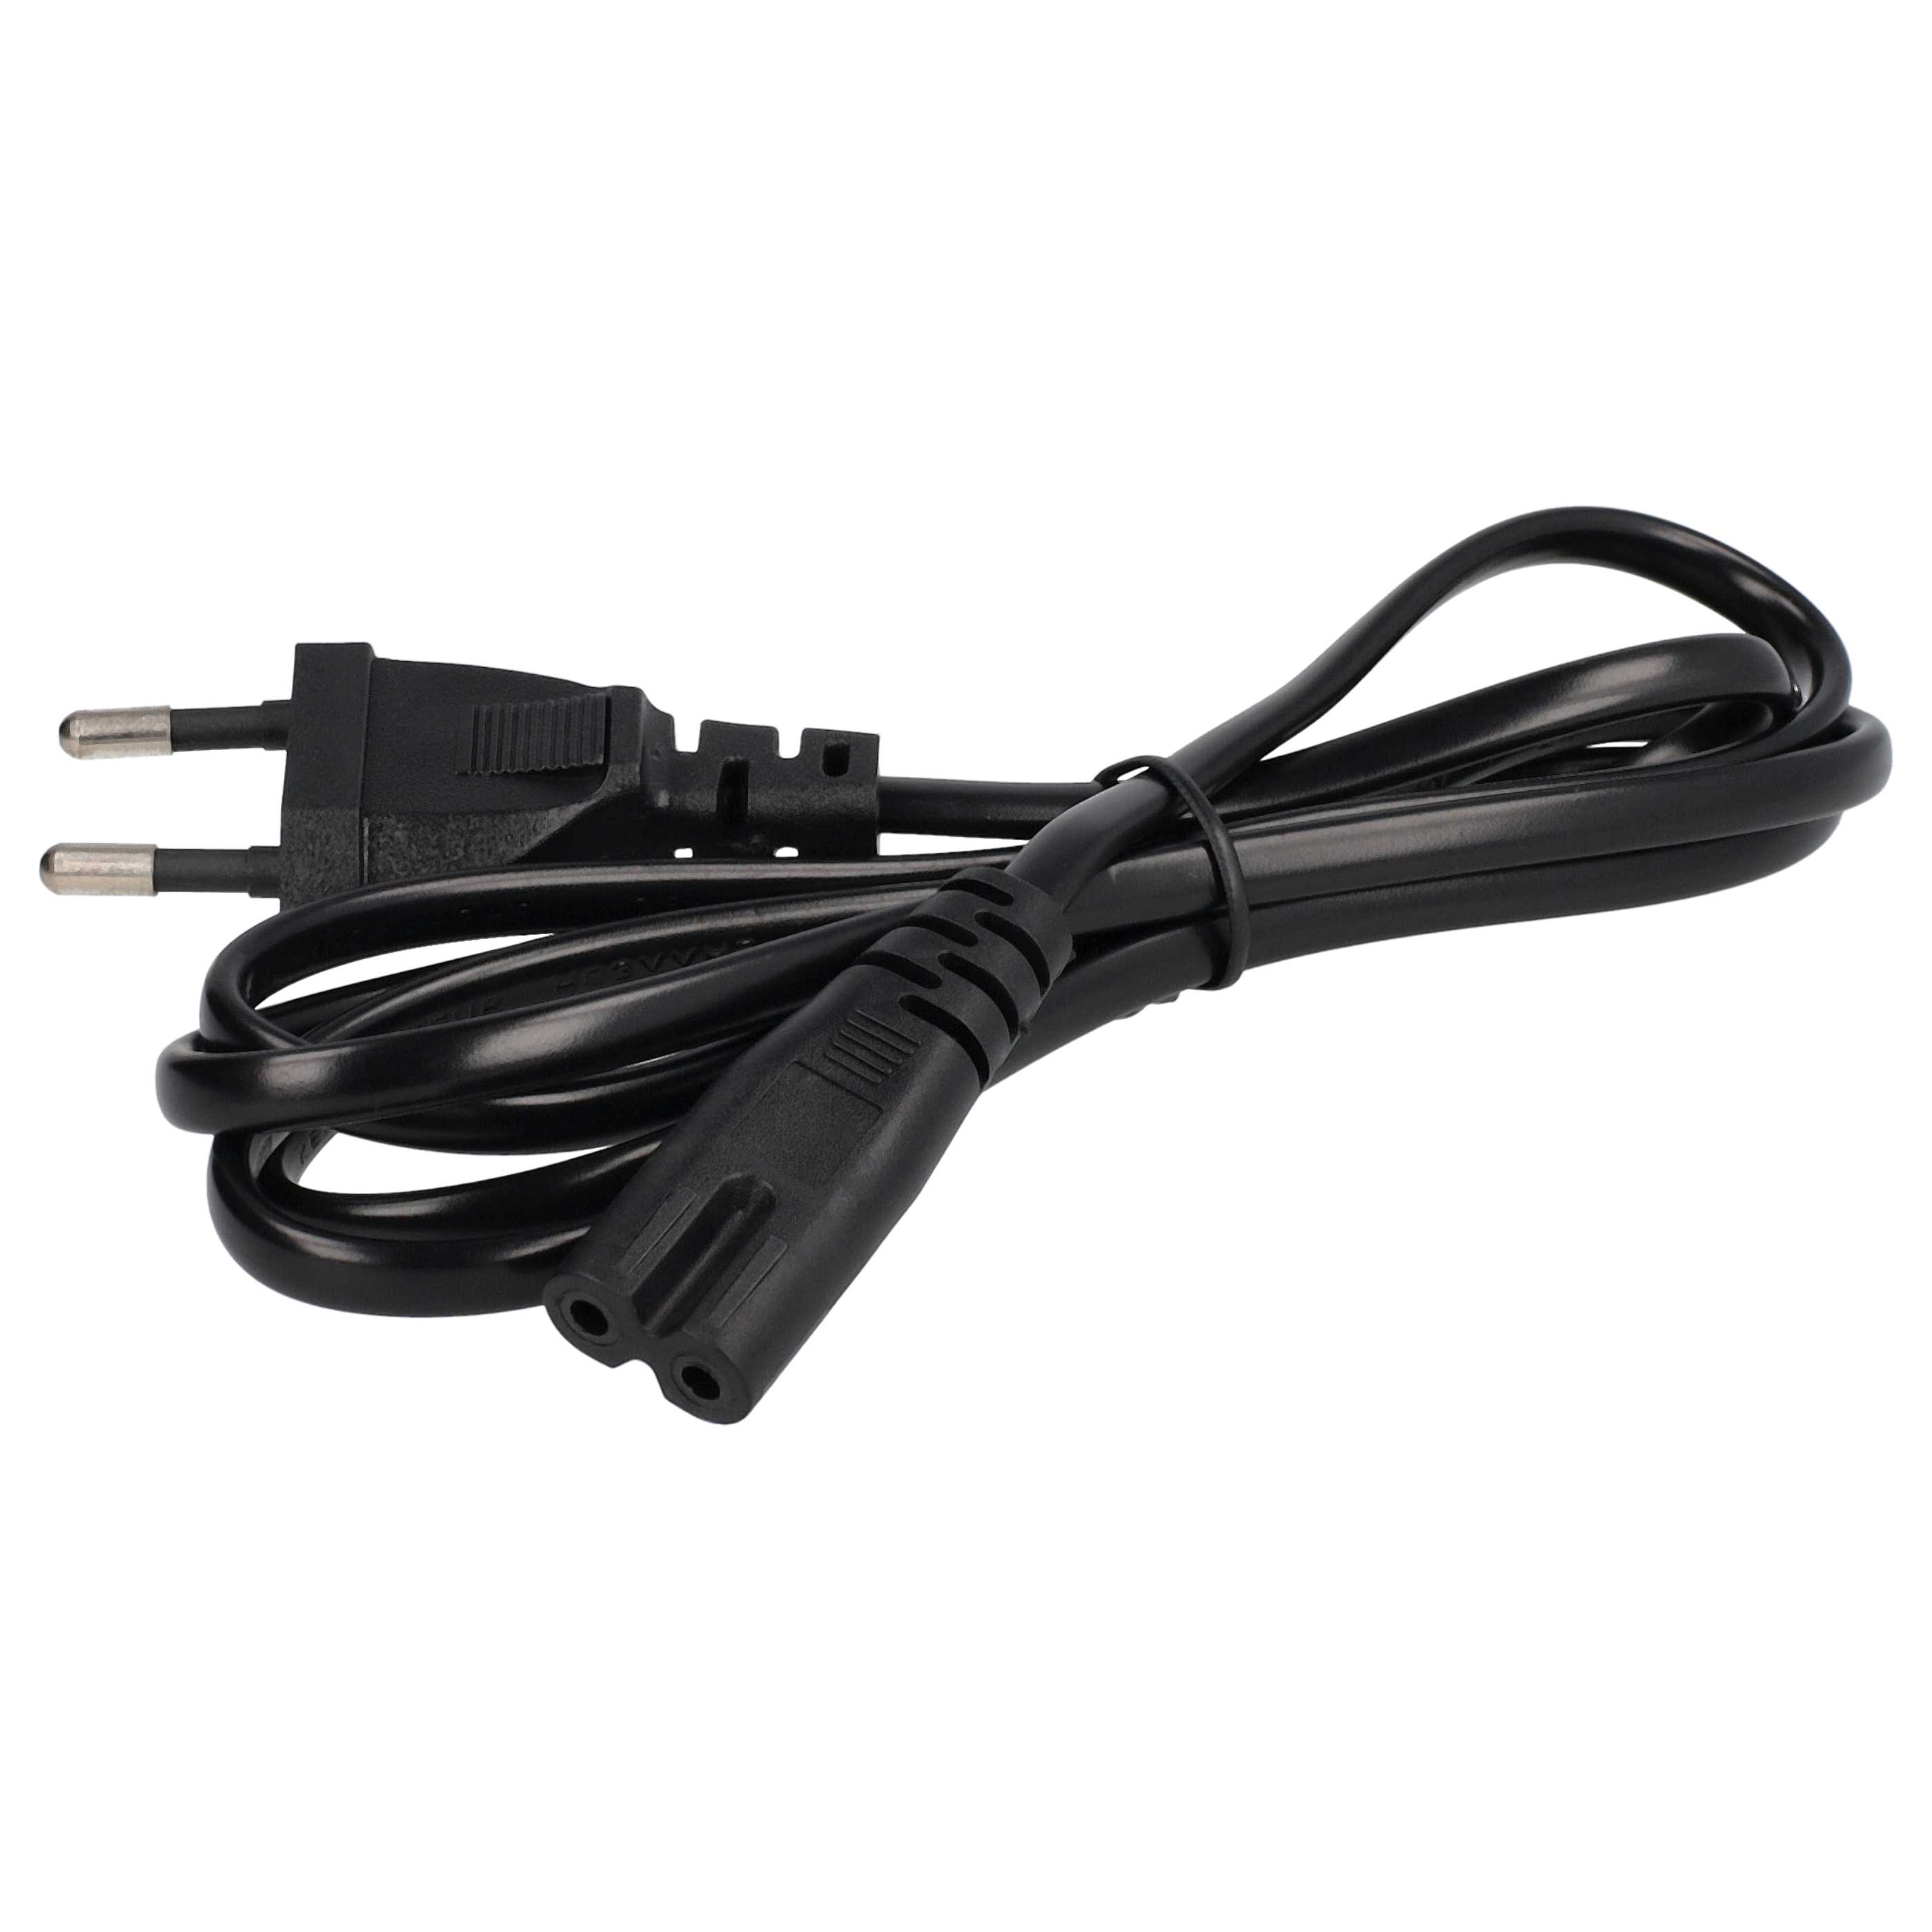 Mains Power Adapter replaces Dell 1Y004, 310-1650, 310-1093, 310-4615, 310-2993 for DellNotebook, 90 W